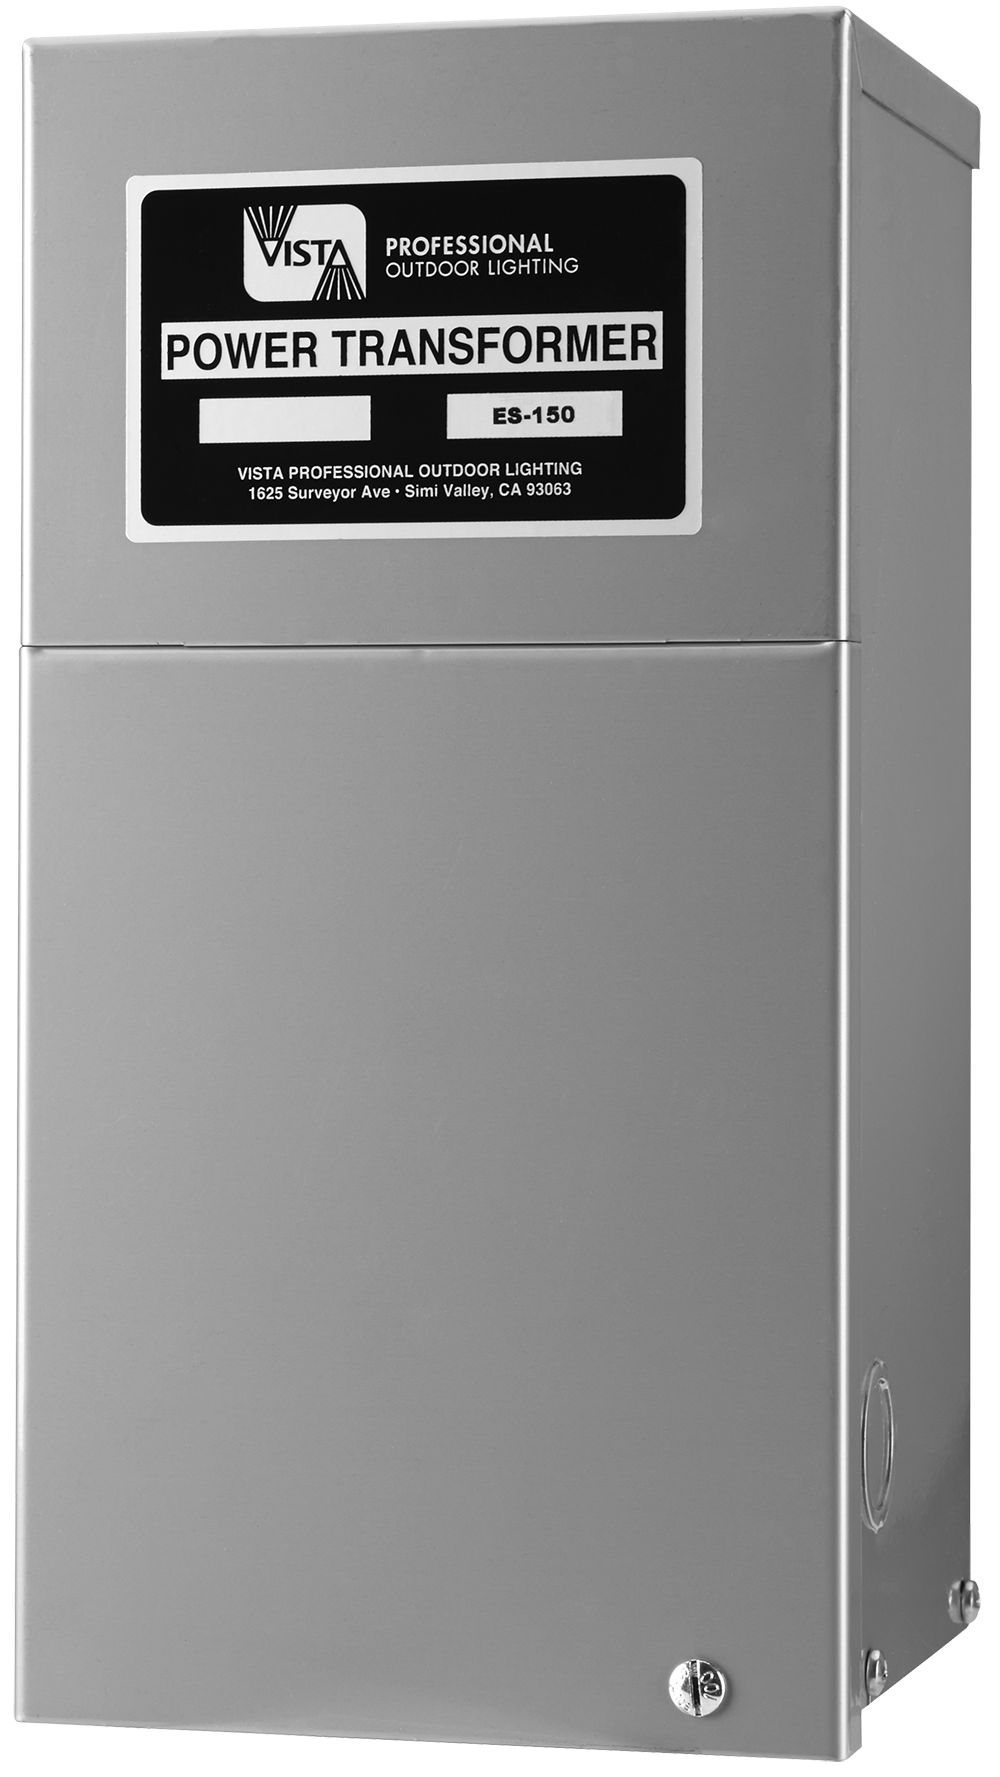 Stainless steal transformer that has a tall rectangular shape with a black label on the front.